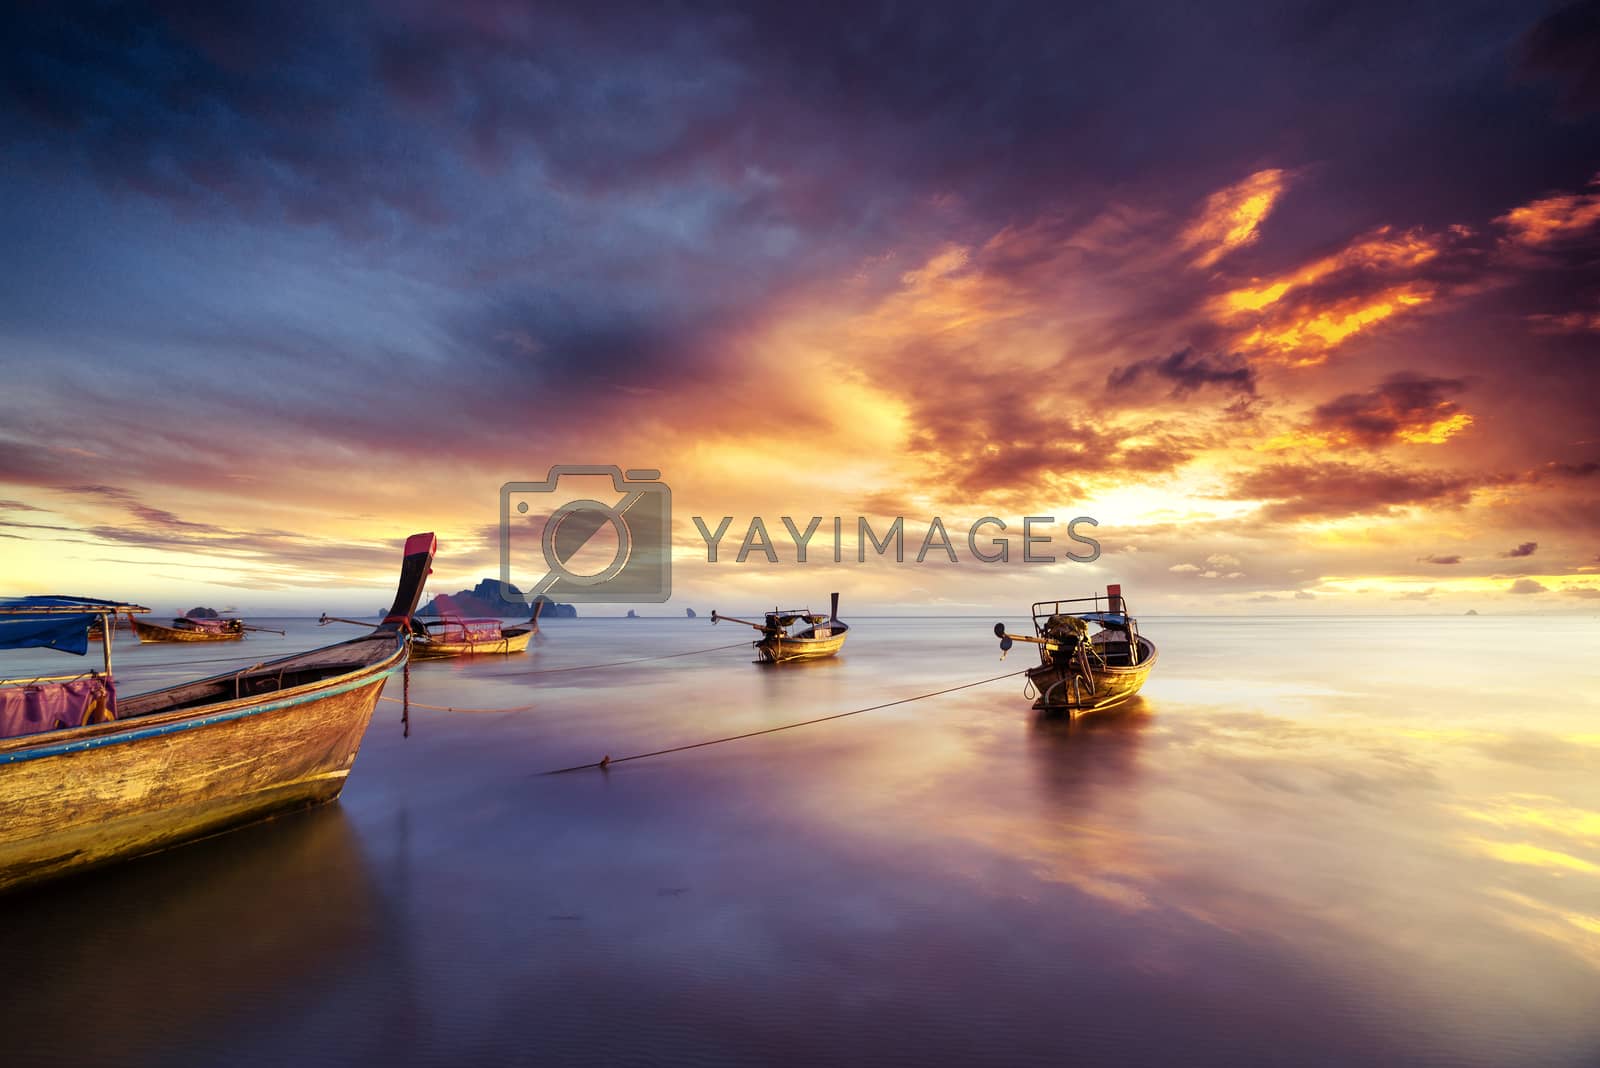 Royalty free image of Traditional long-tail boat on the beach in Thailand by Netfalls